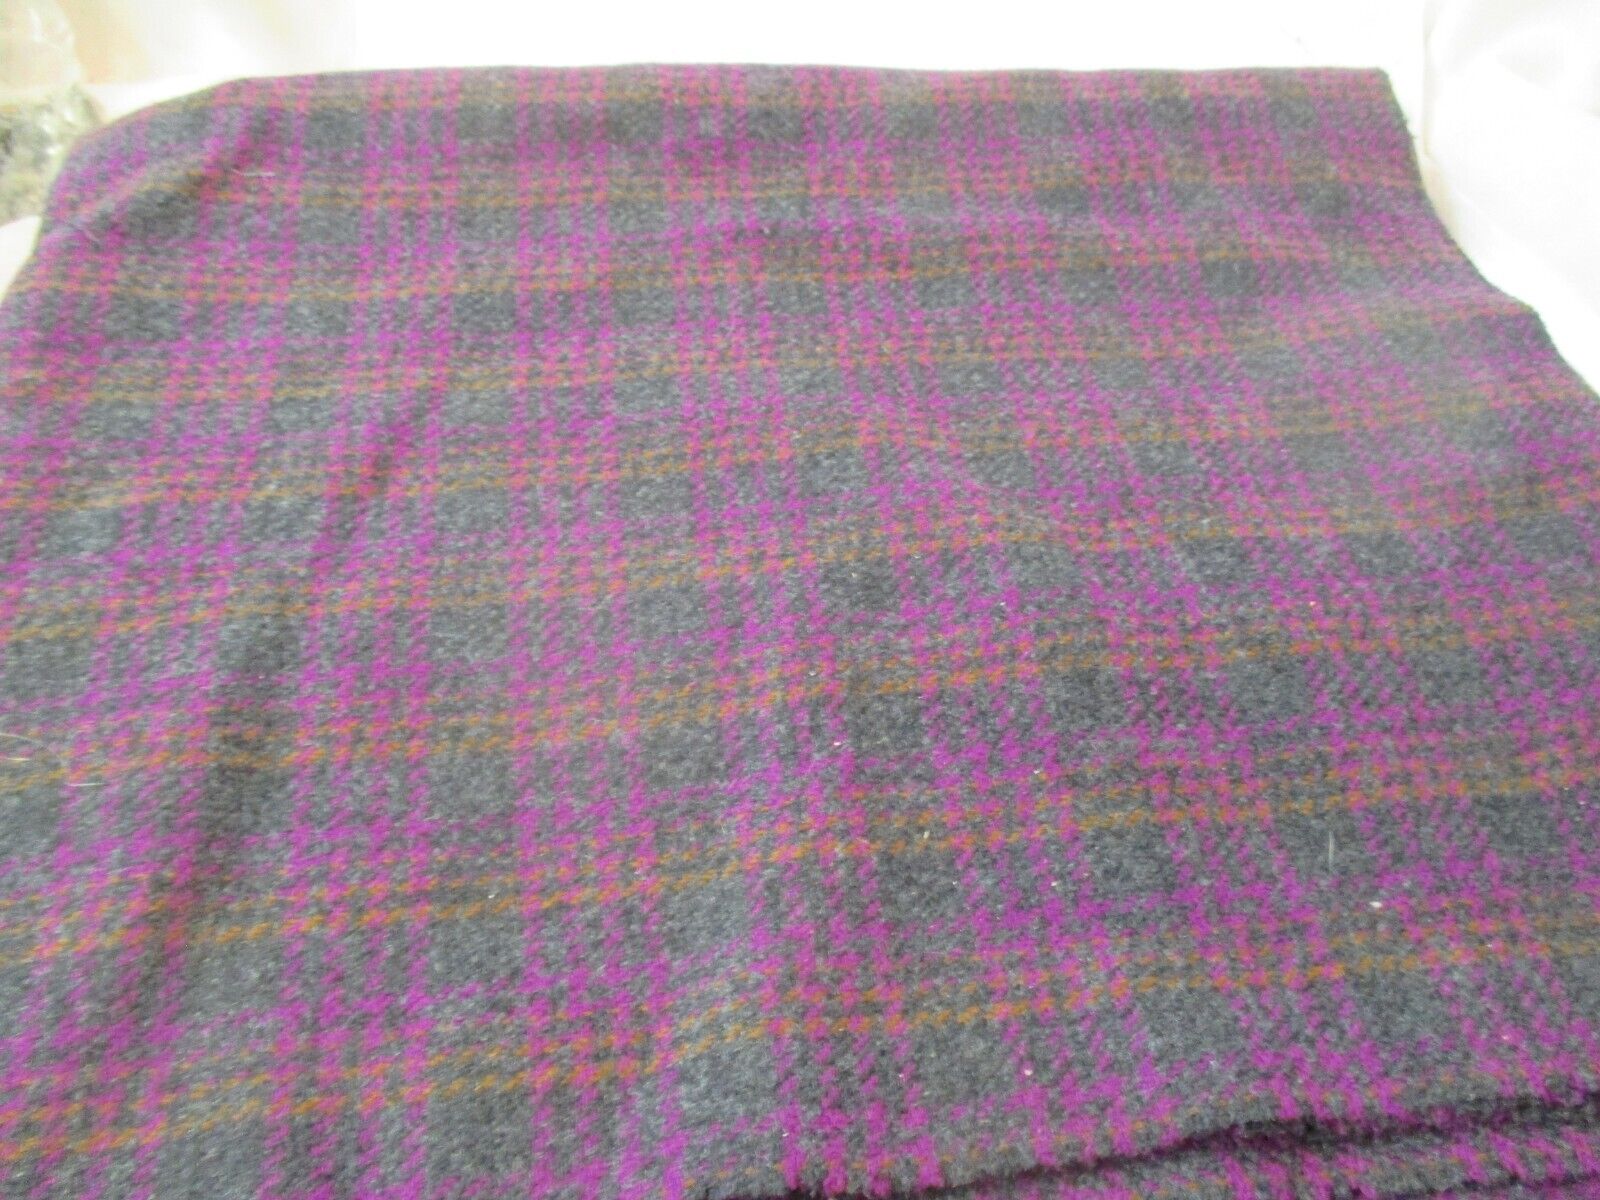 Vintage wool Fabric Material check plaid gray violet